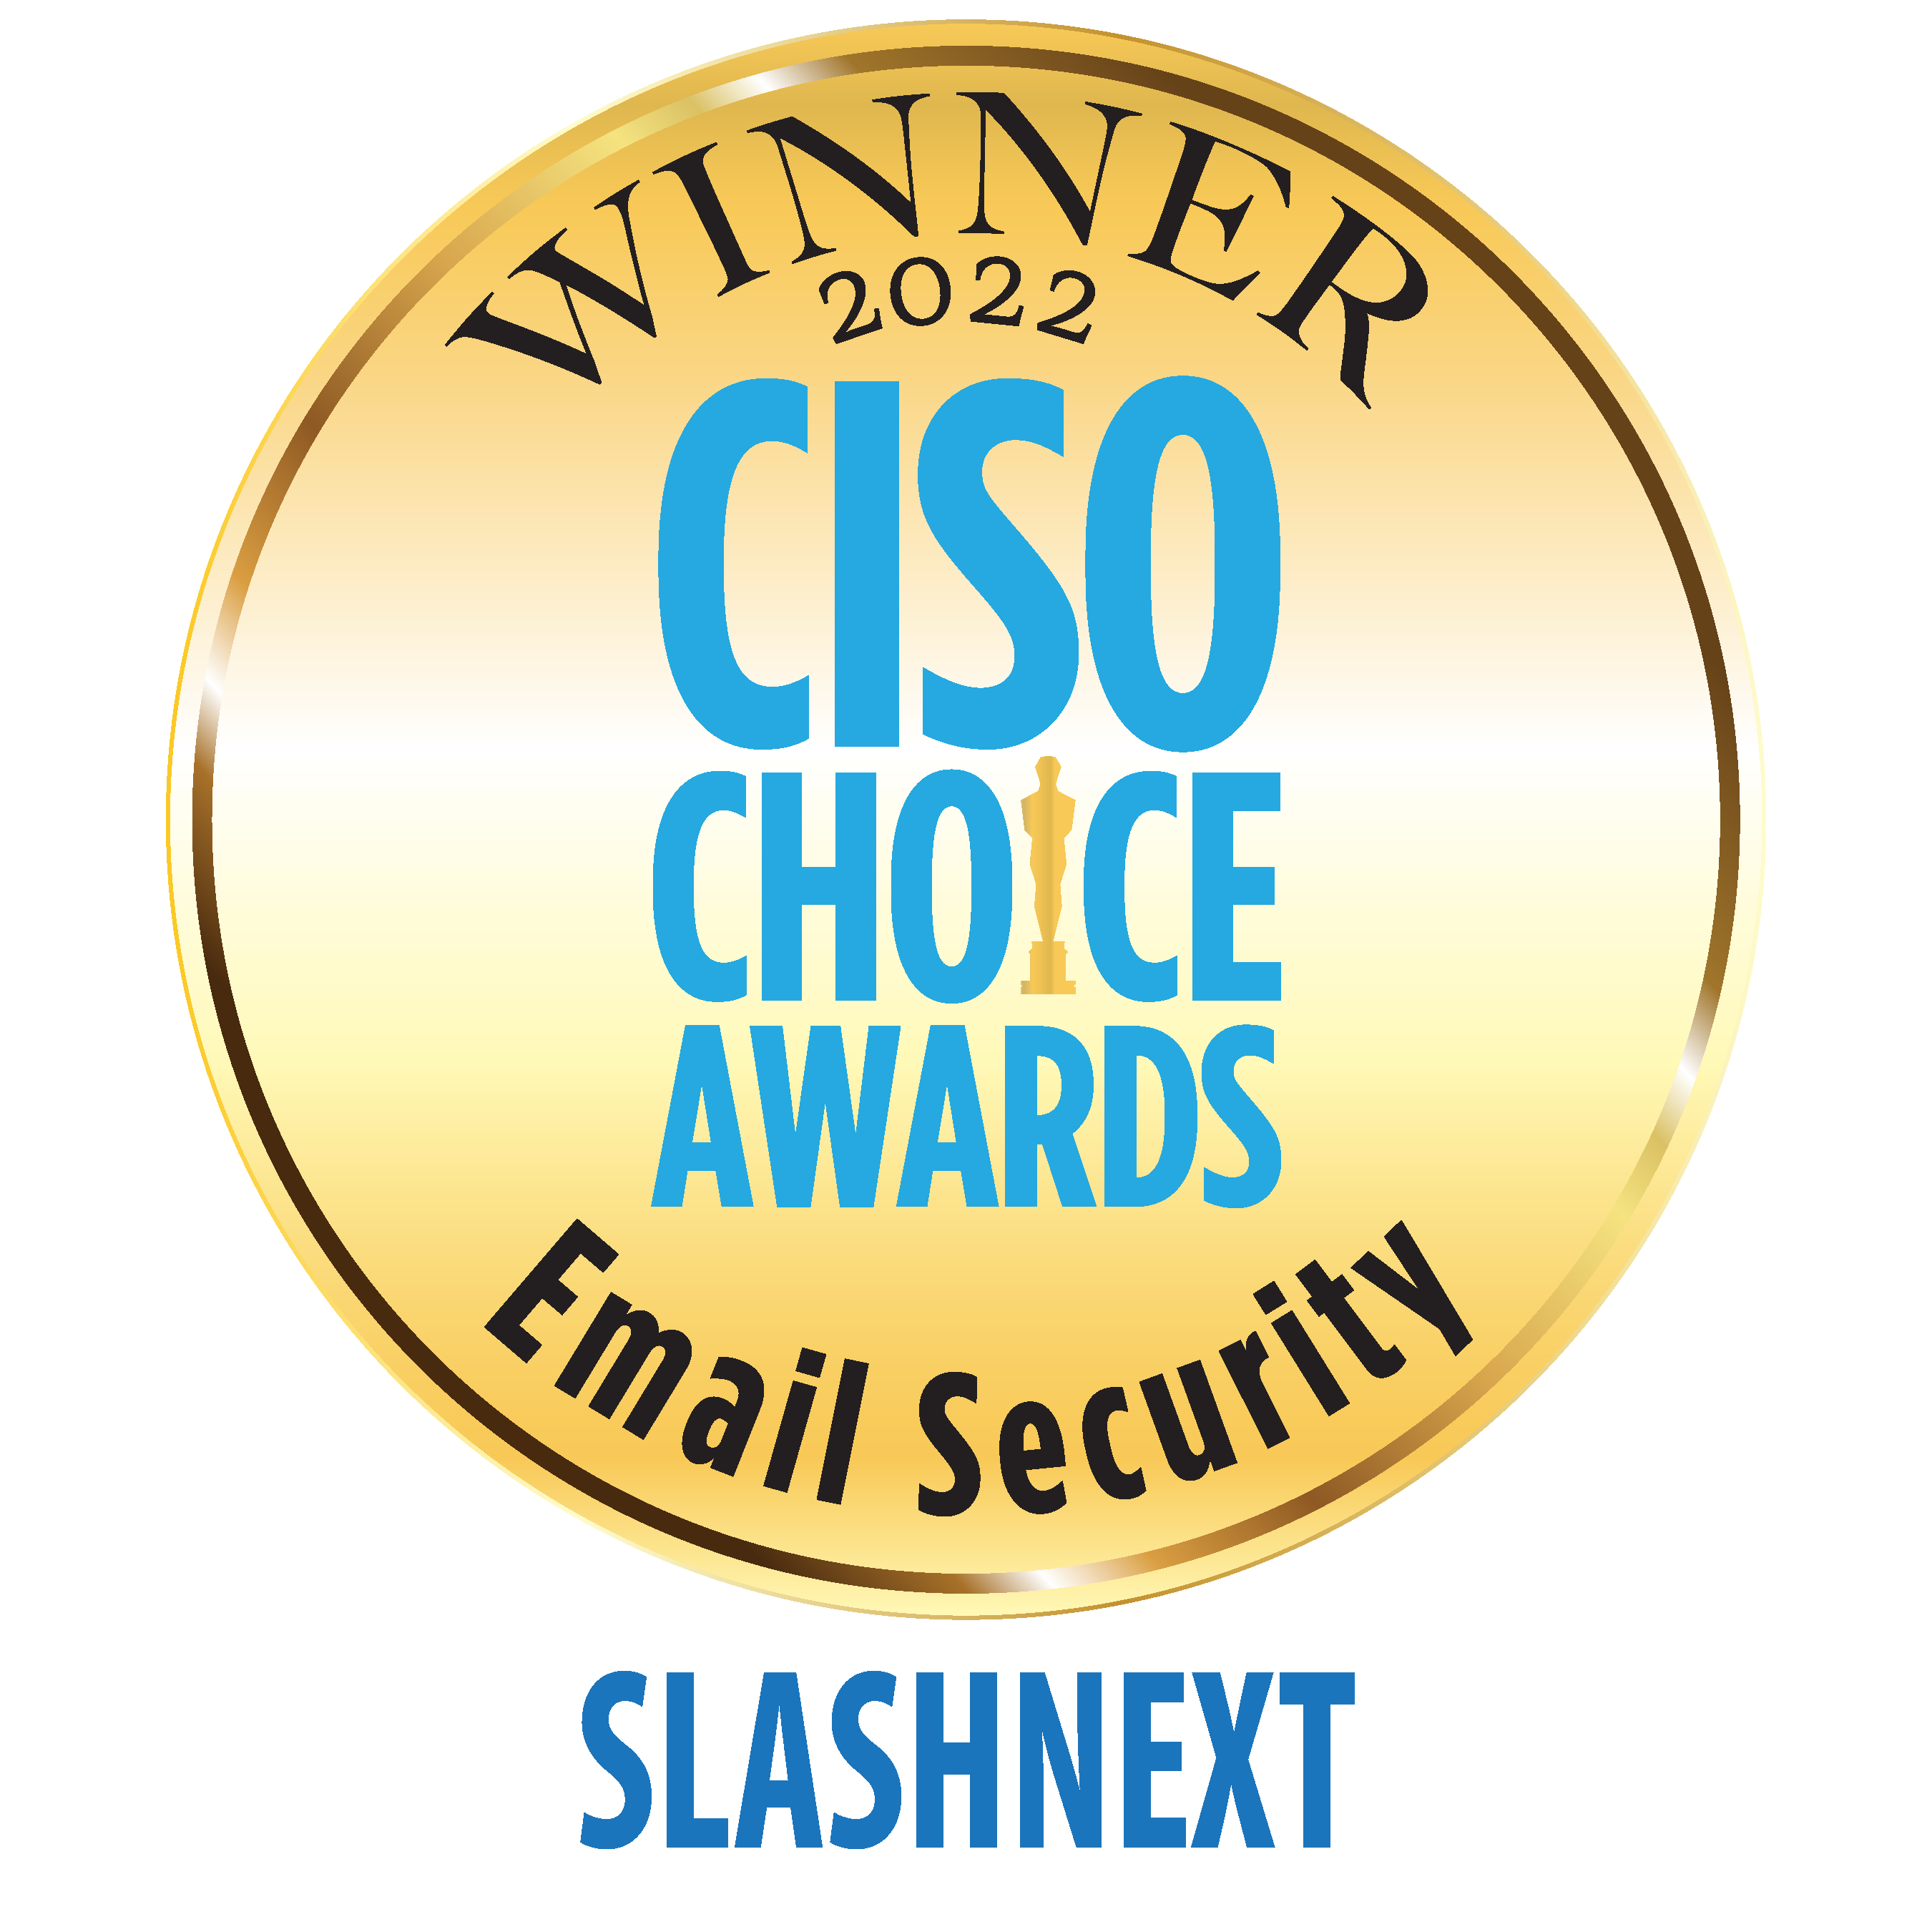 Slashnext Email Security CISO Choice Awards 2022 - Security Current